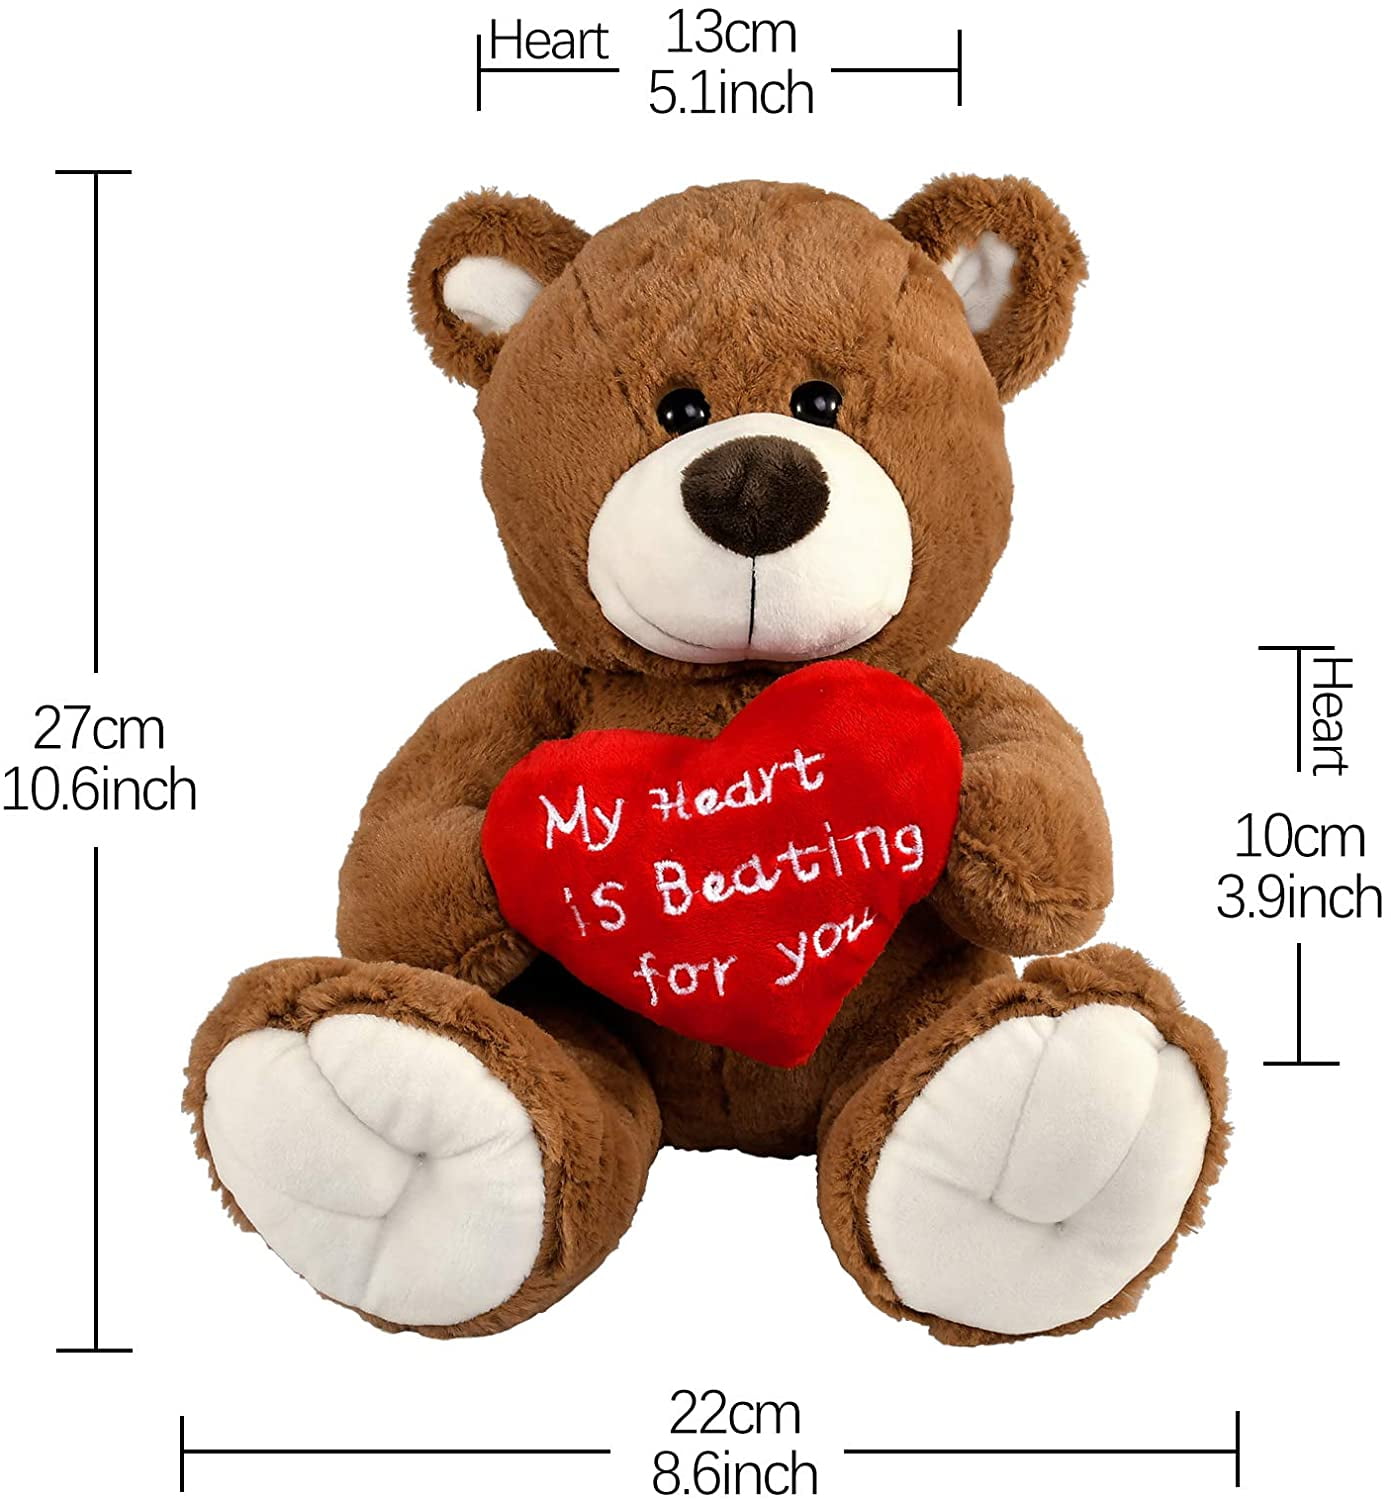 Teddy Bear Gift Present Valentine I LOVE YOU FOREVER Cute Cuddly NEW